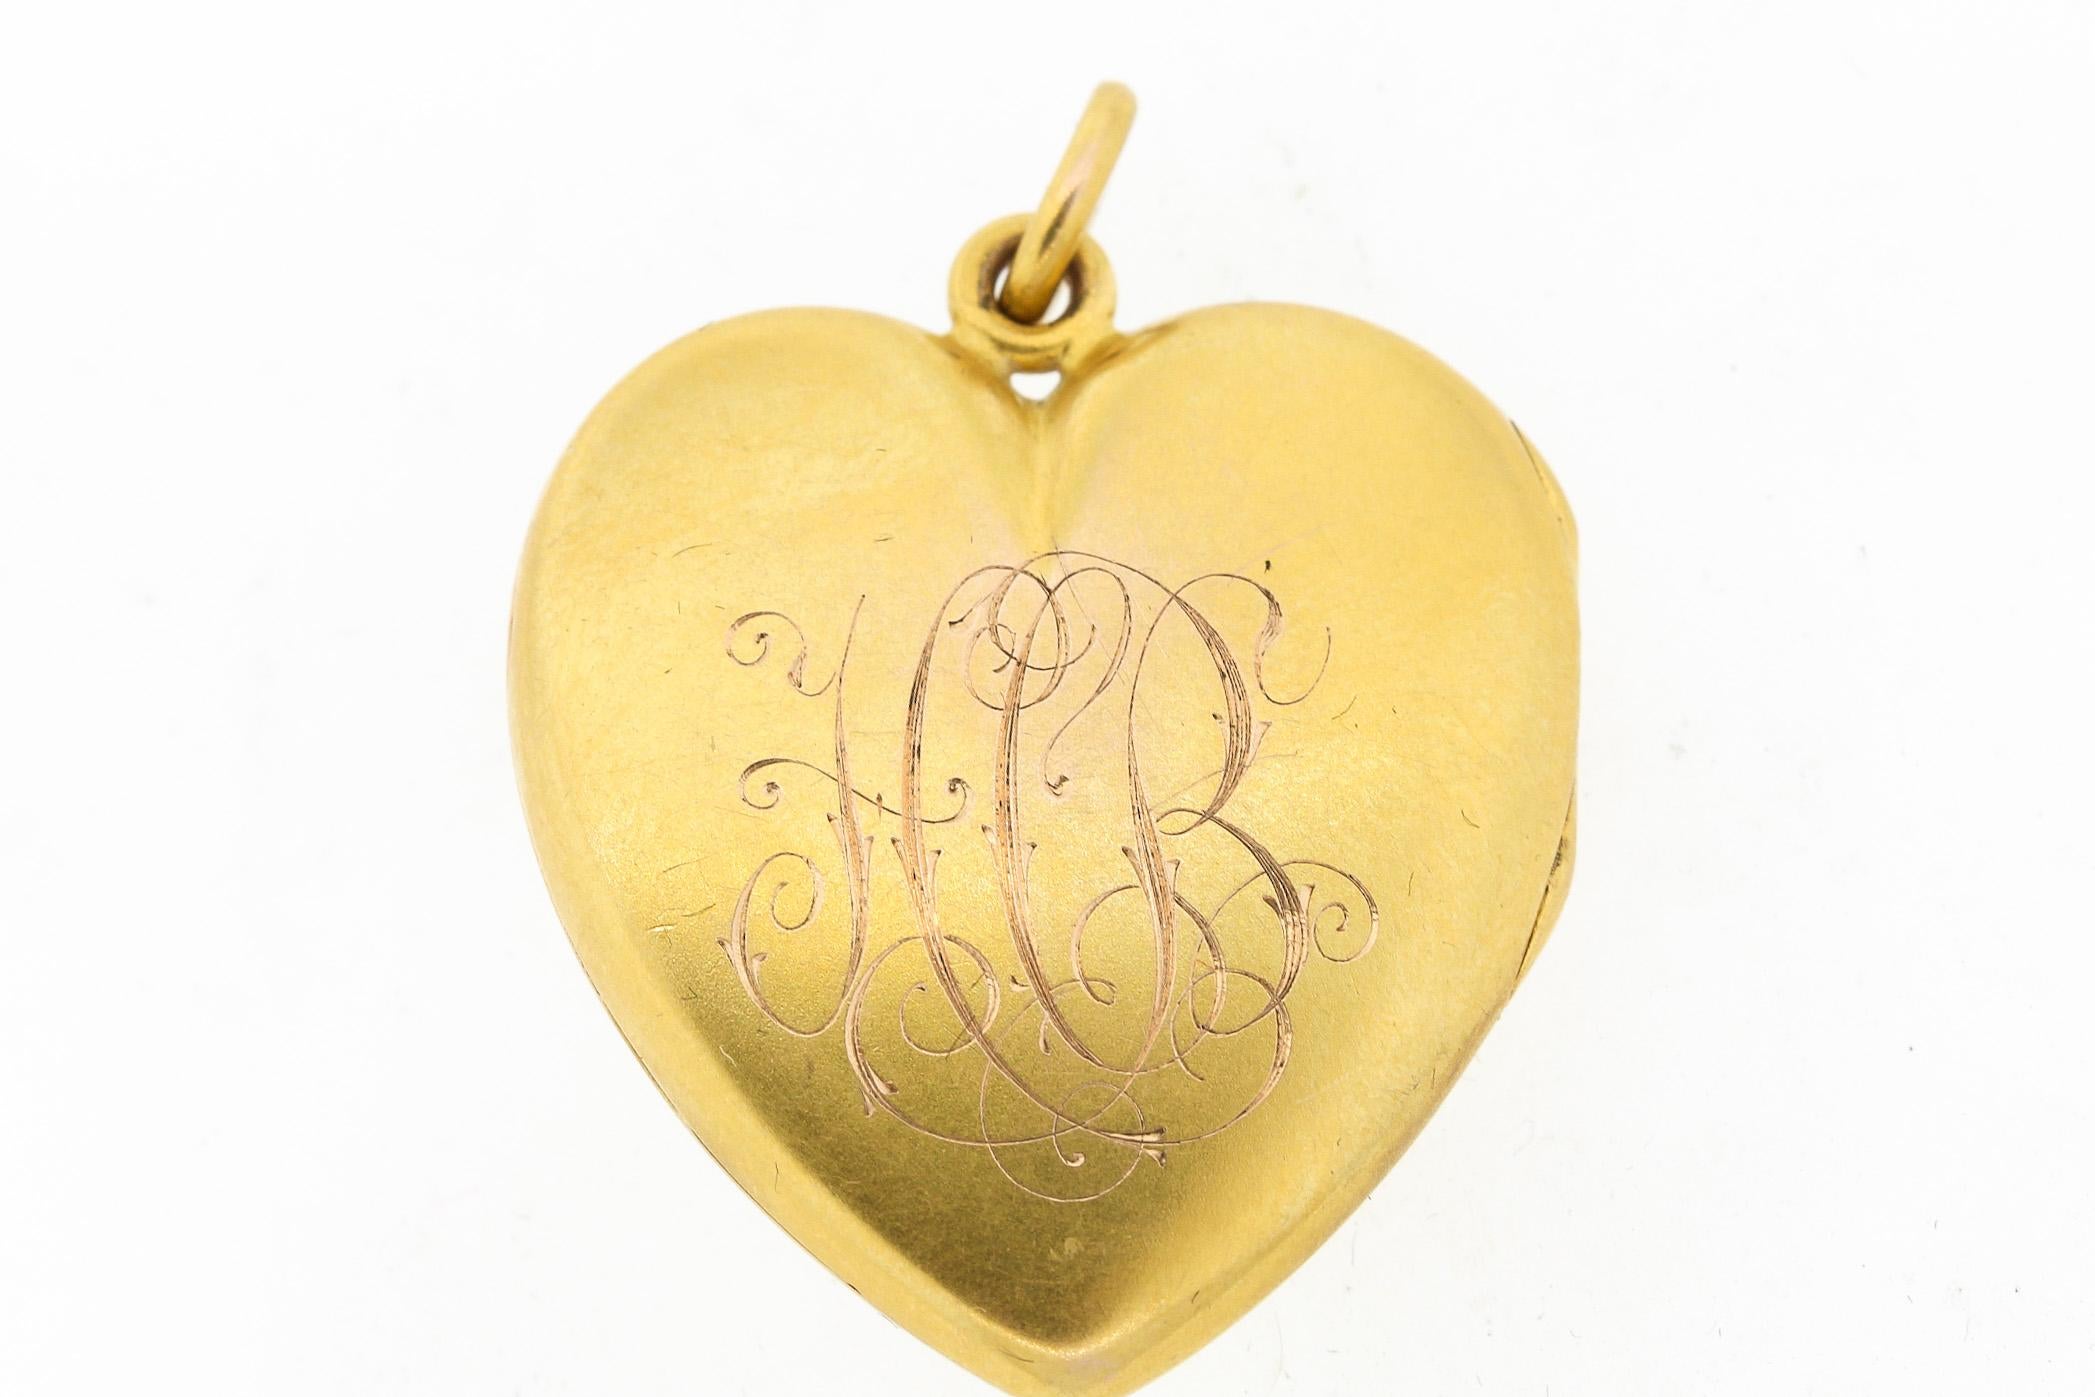 Lovely antique slim heart shaped locket set with a cushion ruby surrounded by rosecut diamonds, circa 1900. The heart has its beautiful original patina, and is marked 14k inside the locket. It has its original crystal inside and even one photo. The